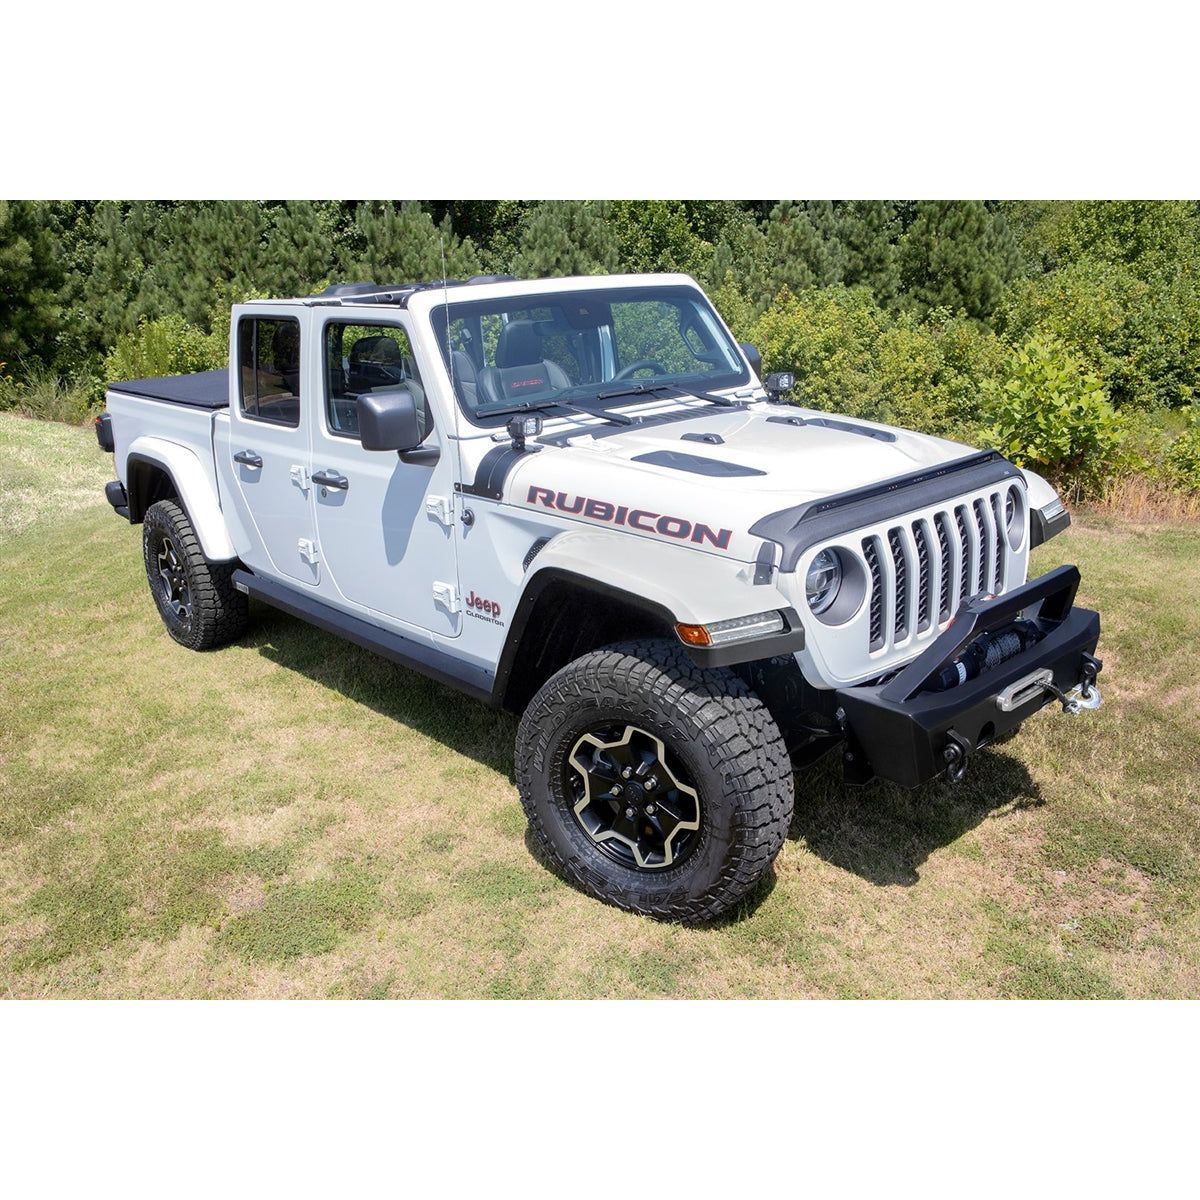 AMP Research PowerStep XL Electric Running Boards for 2020-C Jeep Gladiator JT